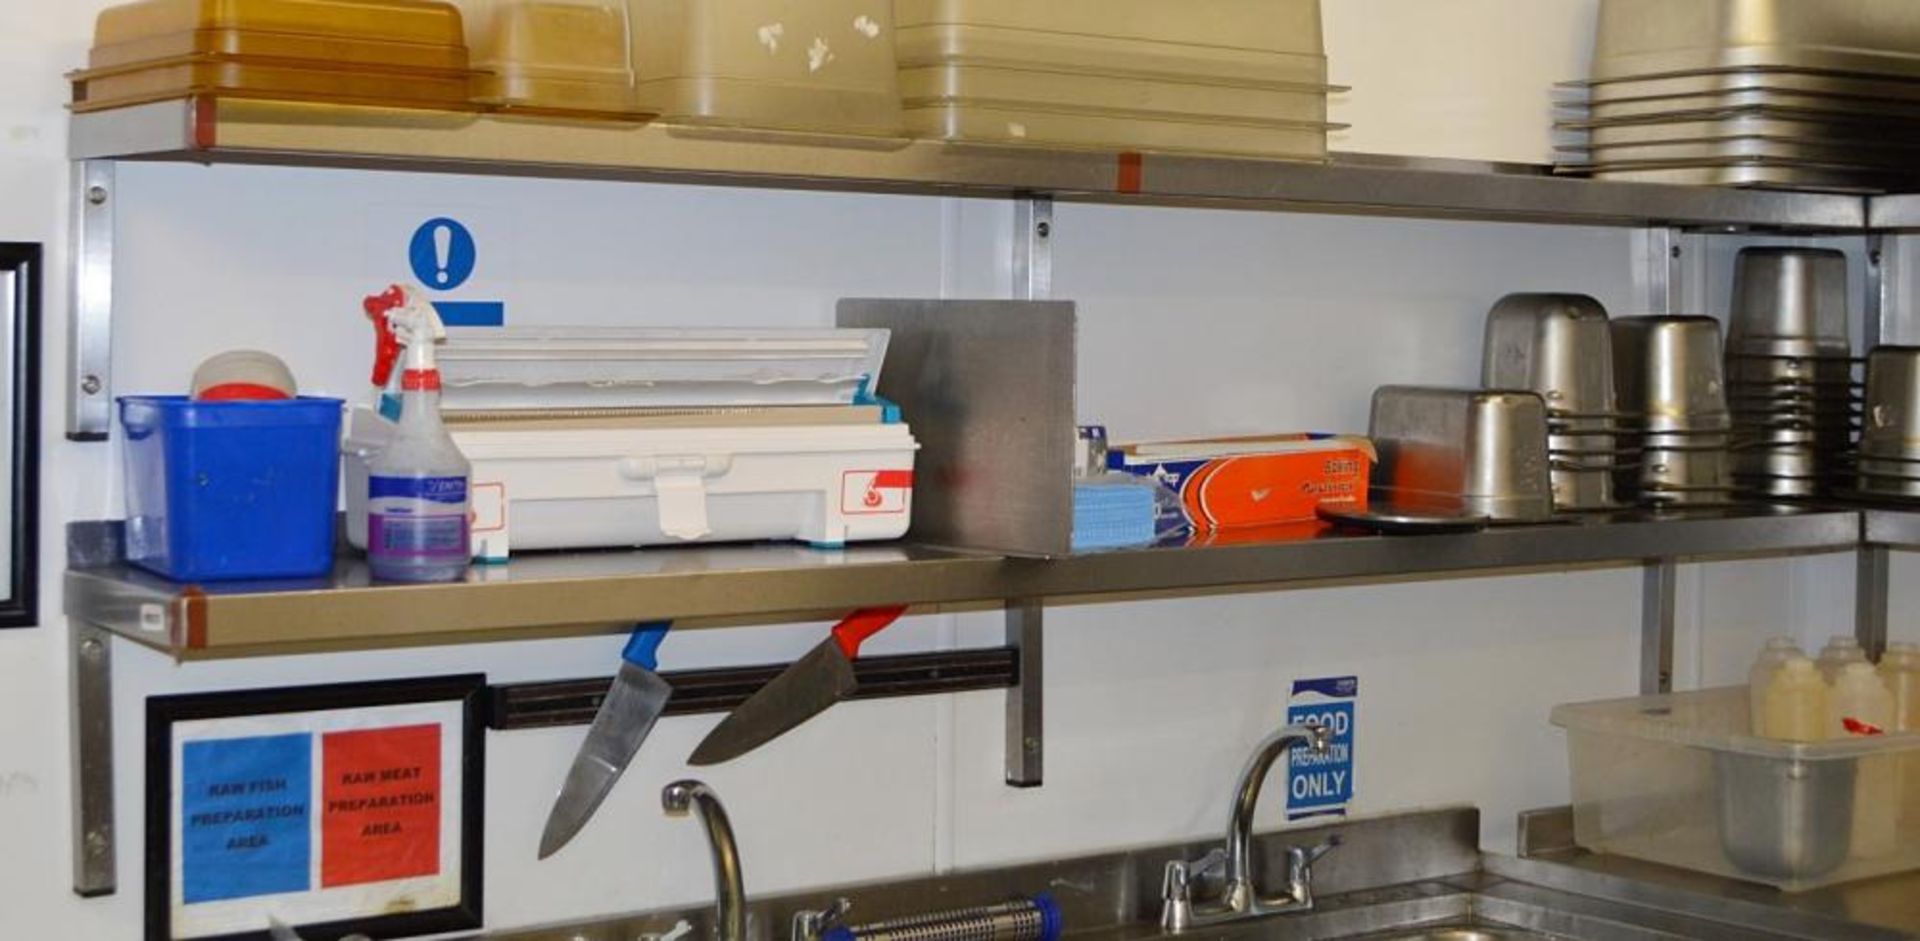 4 x Sections Of Wall Mounted Commercial Kitchen Shelving In Stainless Steel - CL367 - Ref CQ-FB236 - - Image 2 of 3